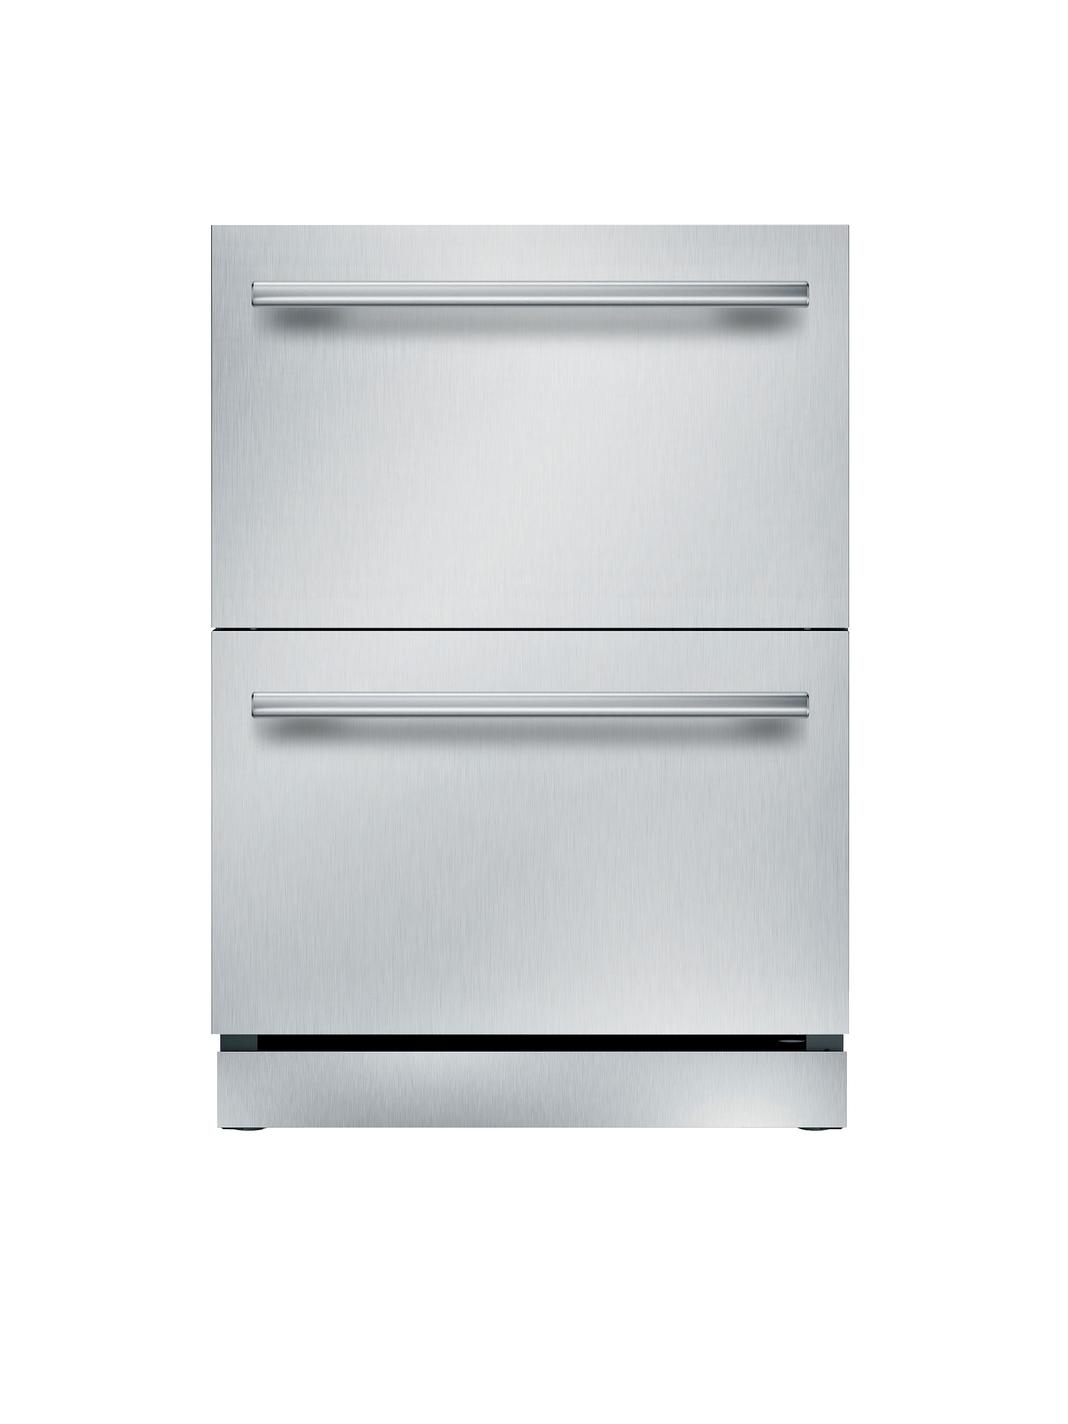 Thermador - 23.875 Inch 5 cu. ft Built In / Integrated Refrigerator in Stainless - T24UR910DS